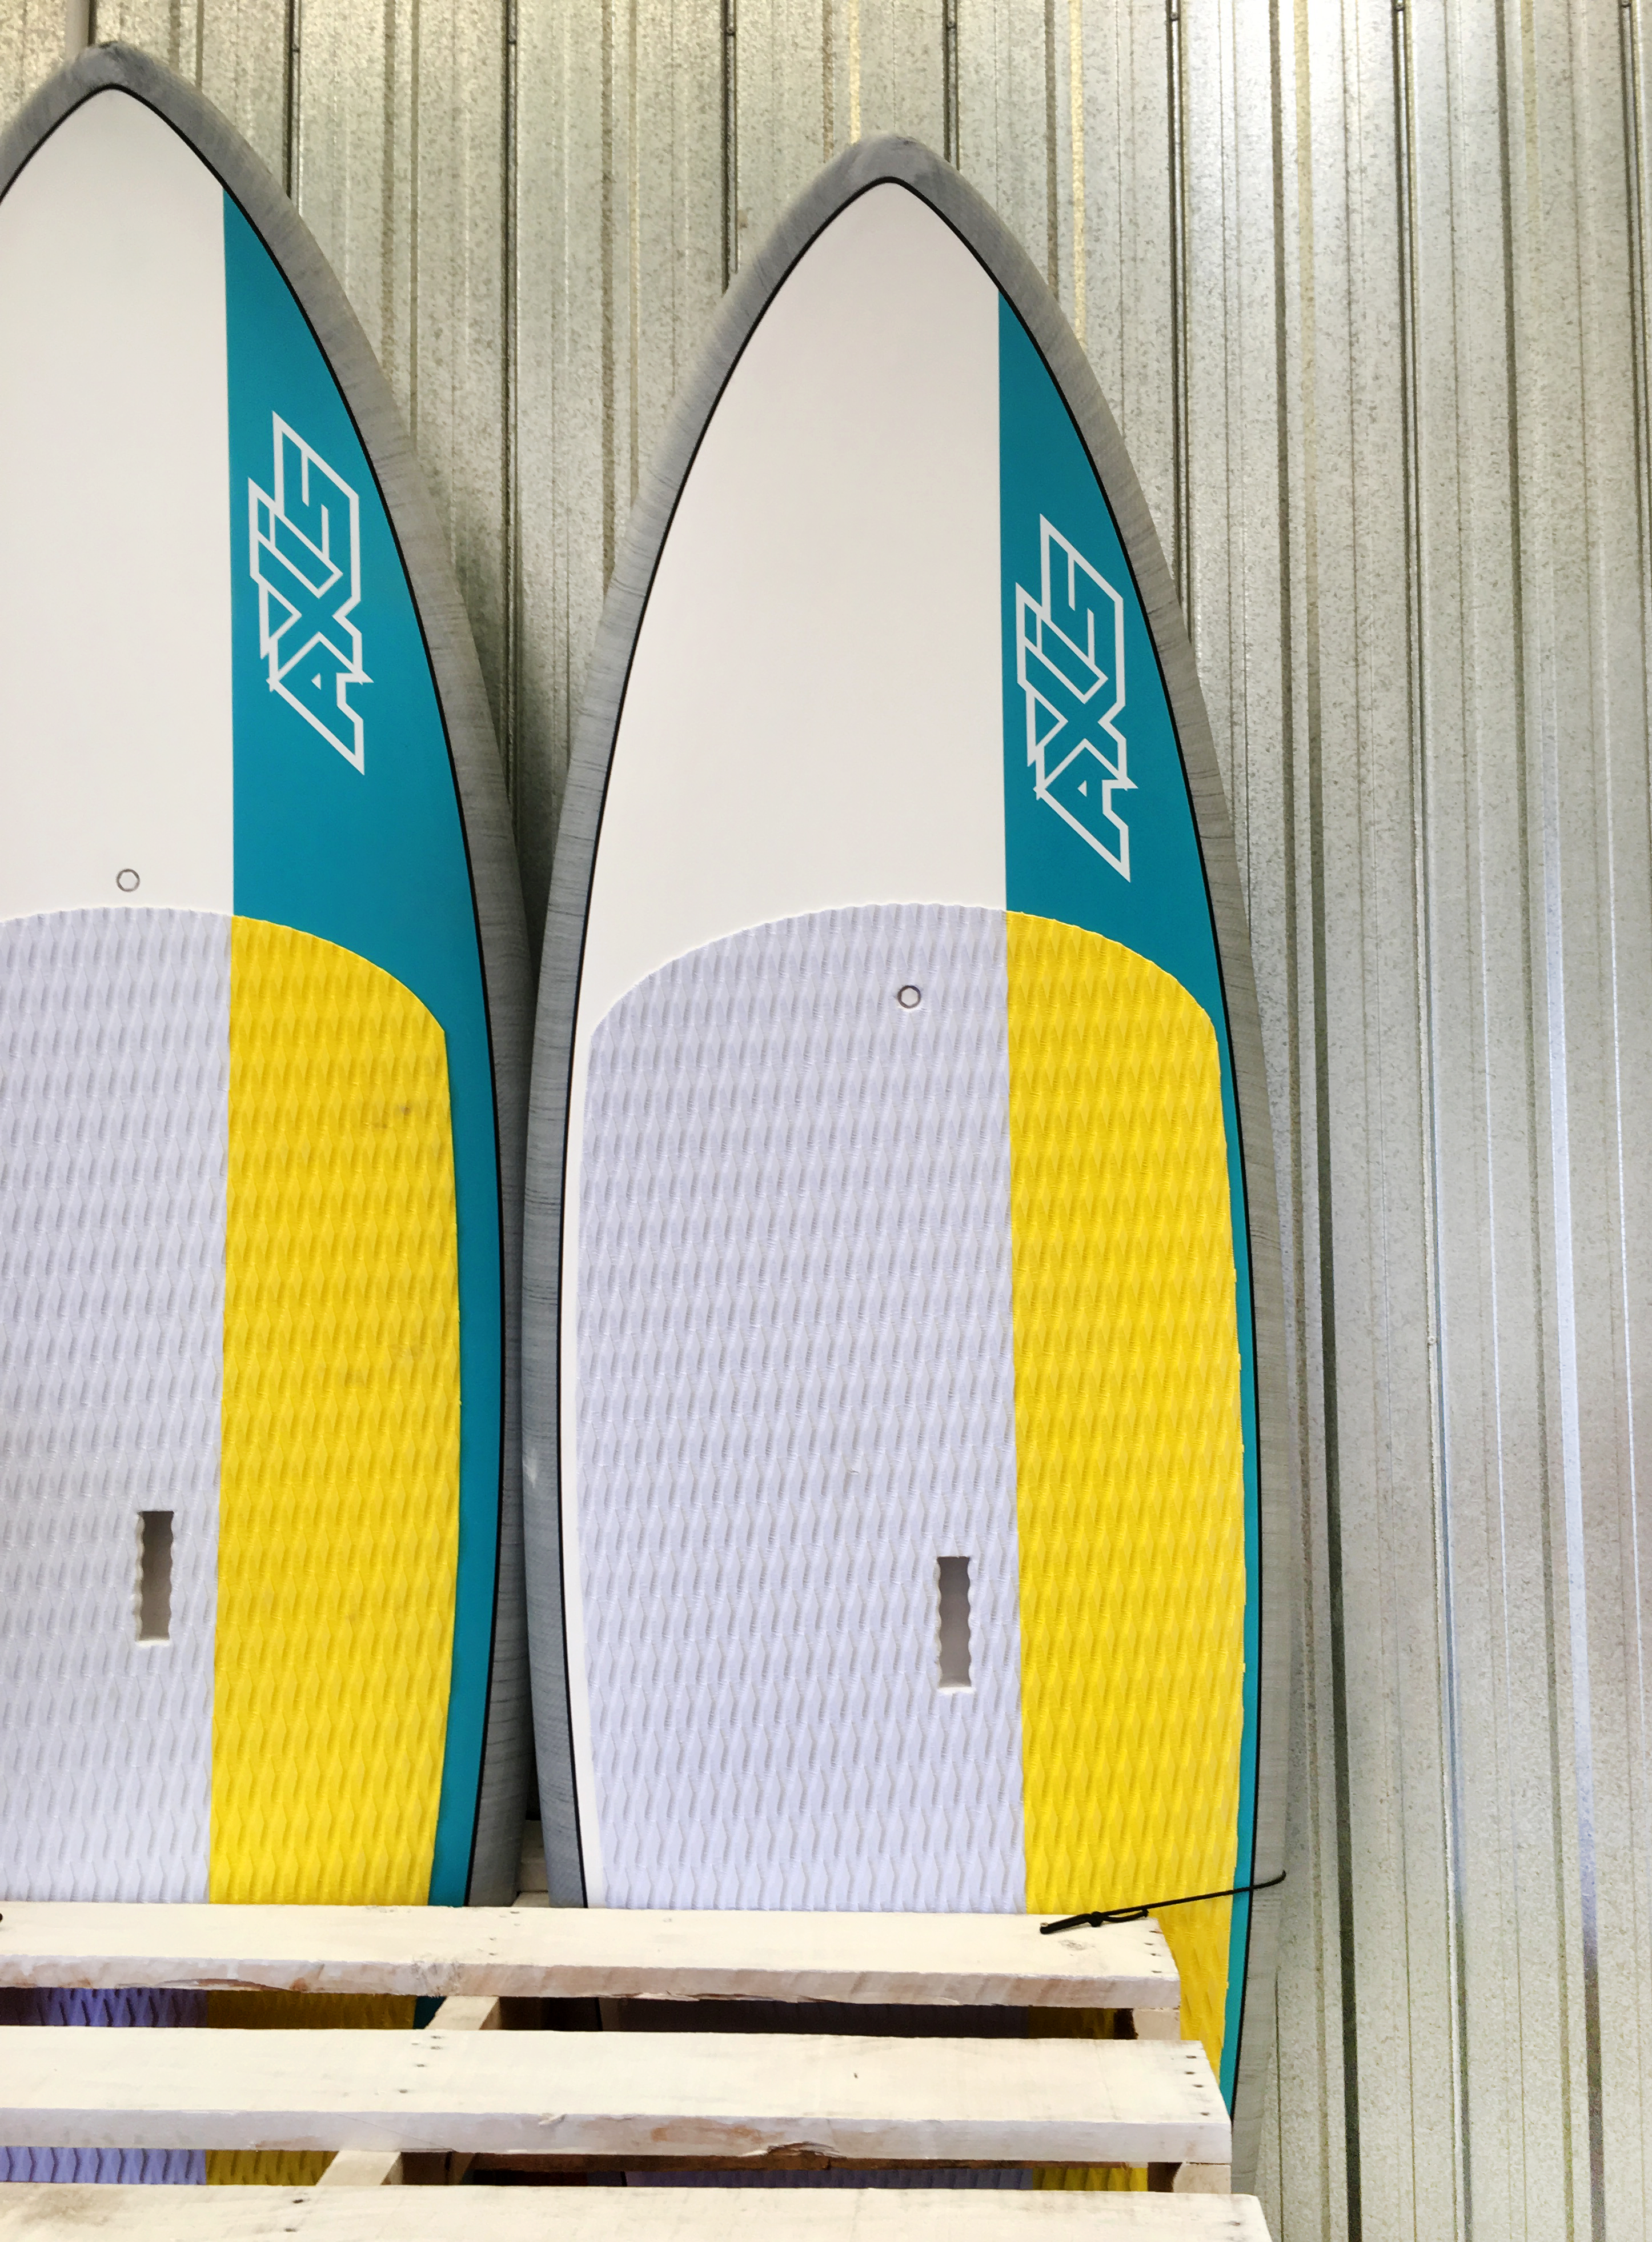 AXIS Surf Standup Paddleboard, Carbon Line